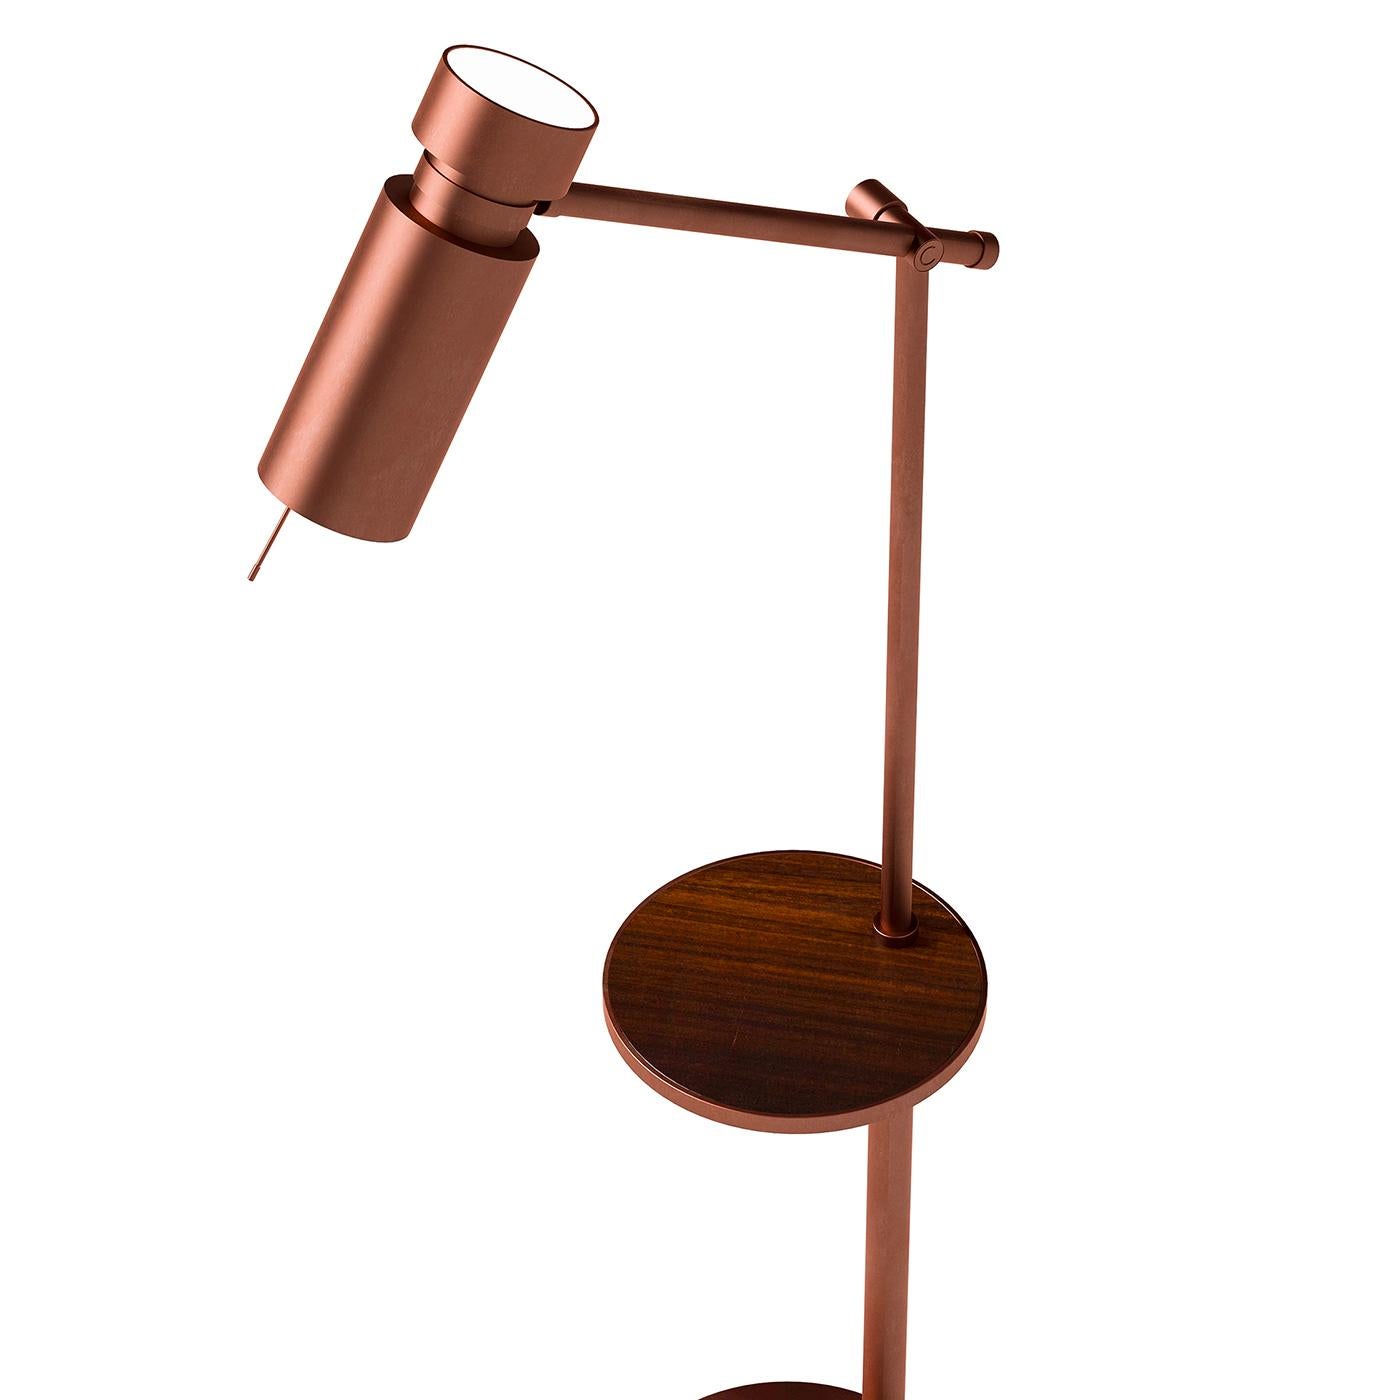 A captivating use of linear forms, this superb floor lamp will deliver Classic sophistication to any modern interior decor. Marked by a bold angular silhouette crafted of metal with a brushed-copper finish, this lamp stands on a round base and